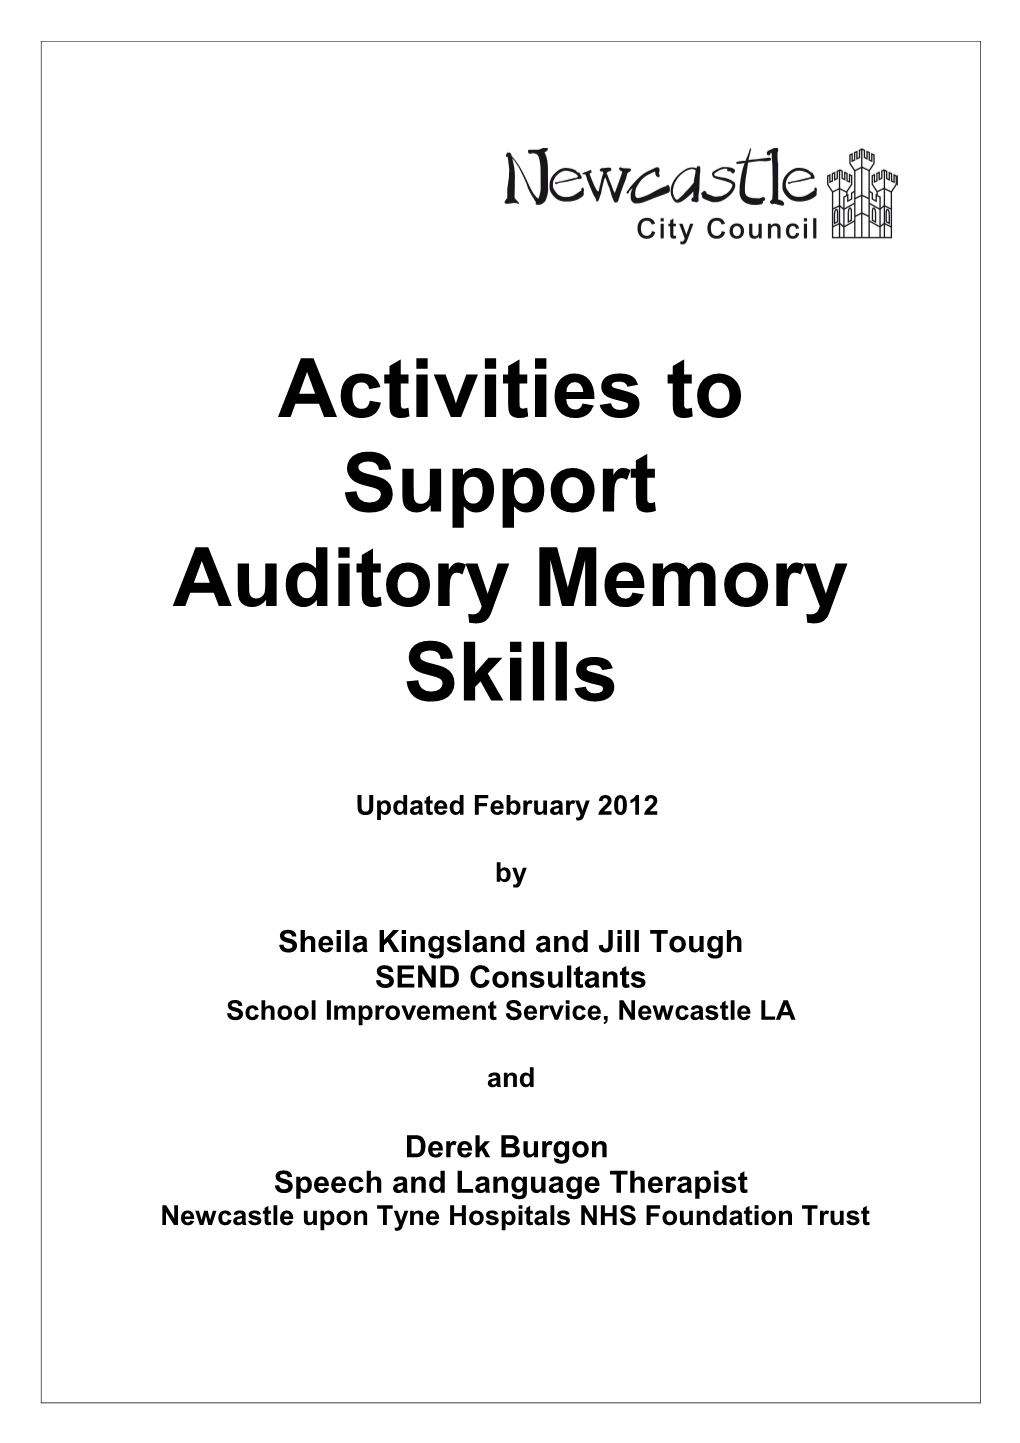 Activities to Support Auditory Skills